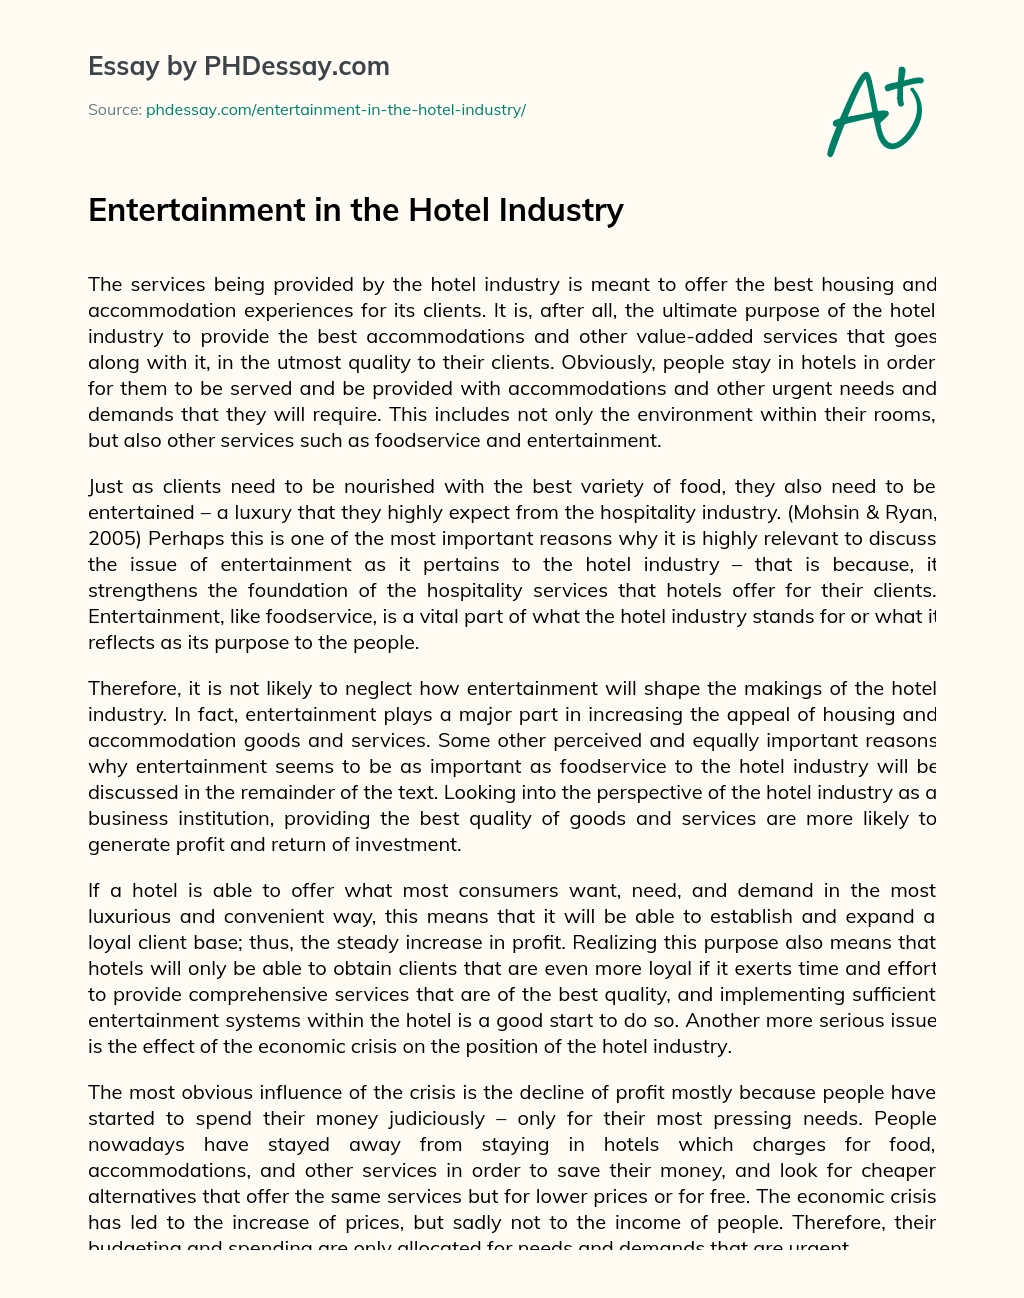 Entertainment in the Hotel Industry essay